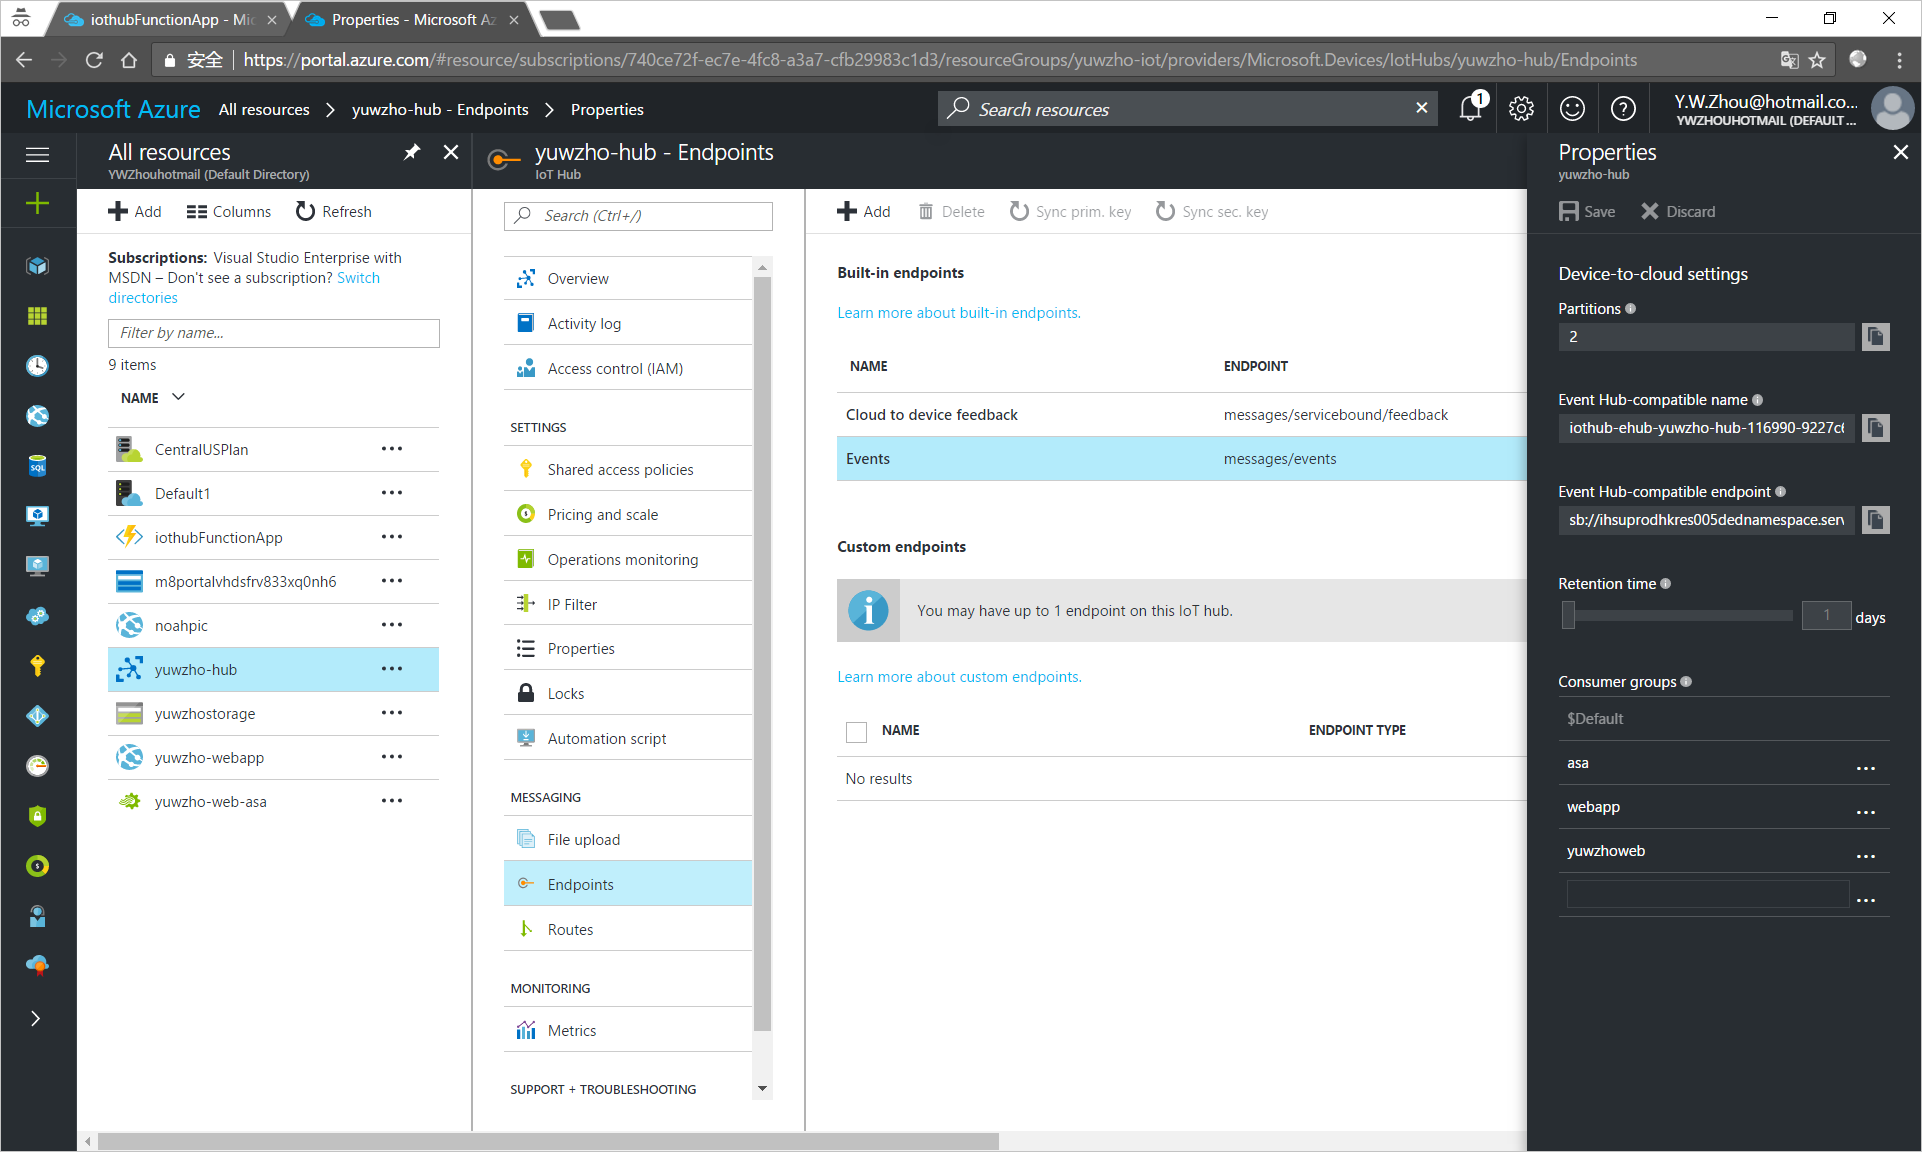 Get the connection string of your IoT hub endpoint in the Azure portal